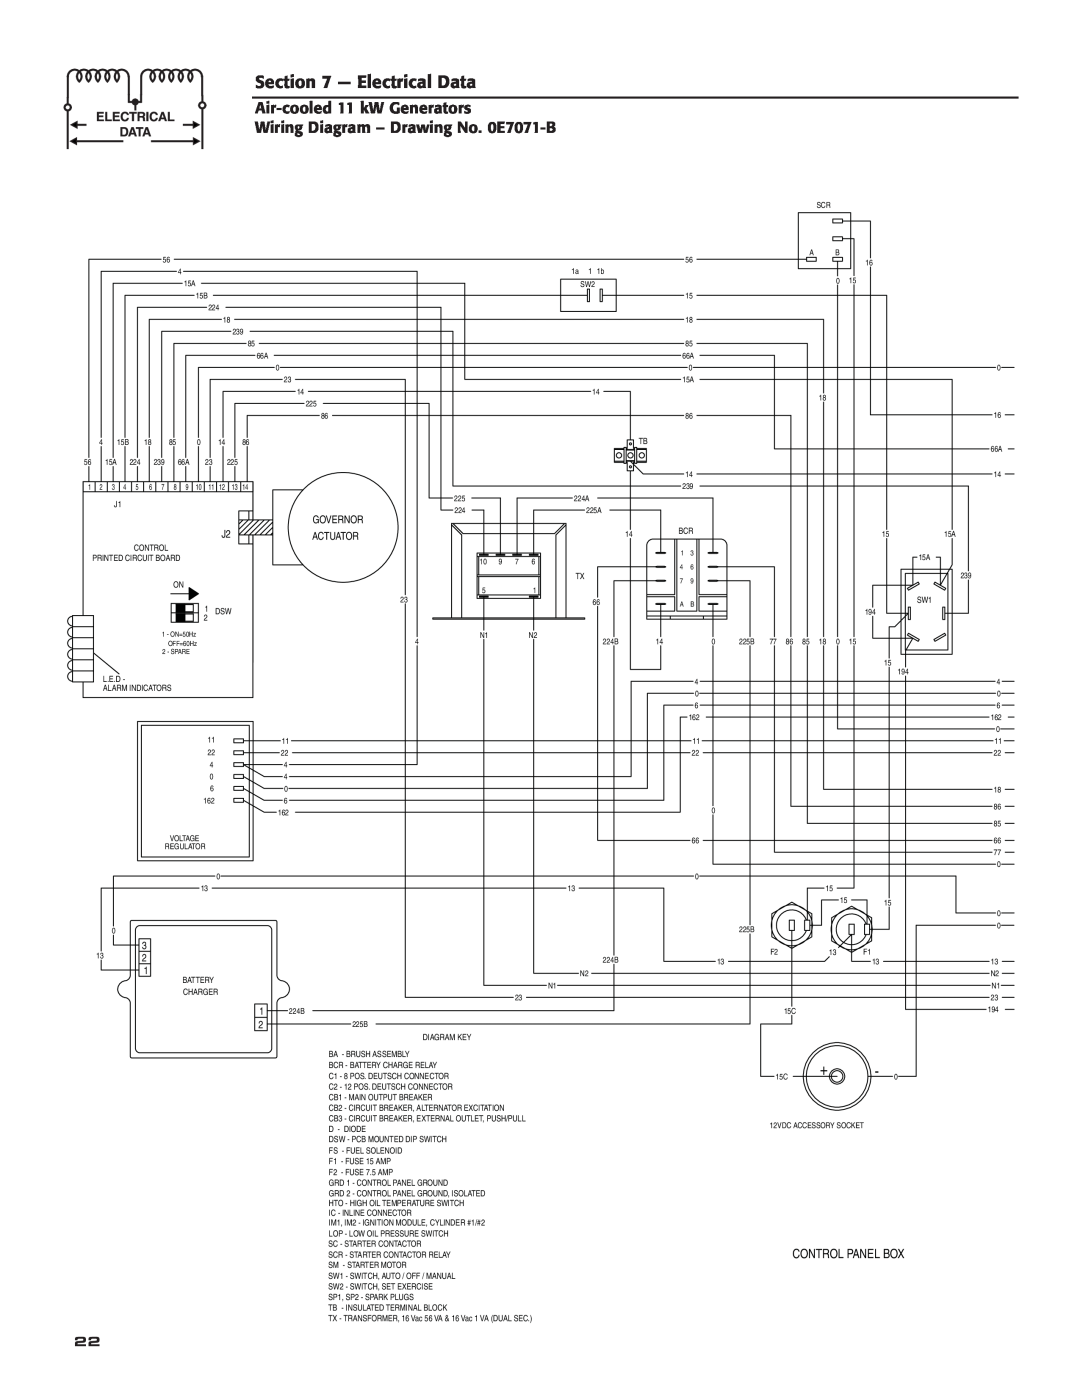 Generac Power Systems 004916-0 Electrical Data, Air-cooled 11 kW Generators Wiring Diagram - Drawing No. 0E7071-B 